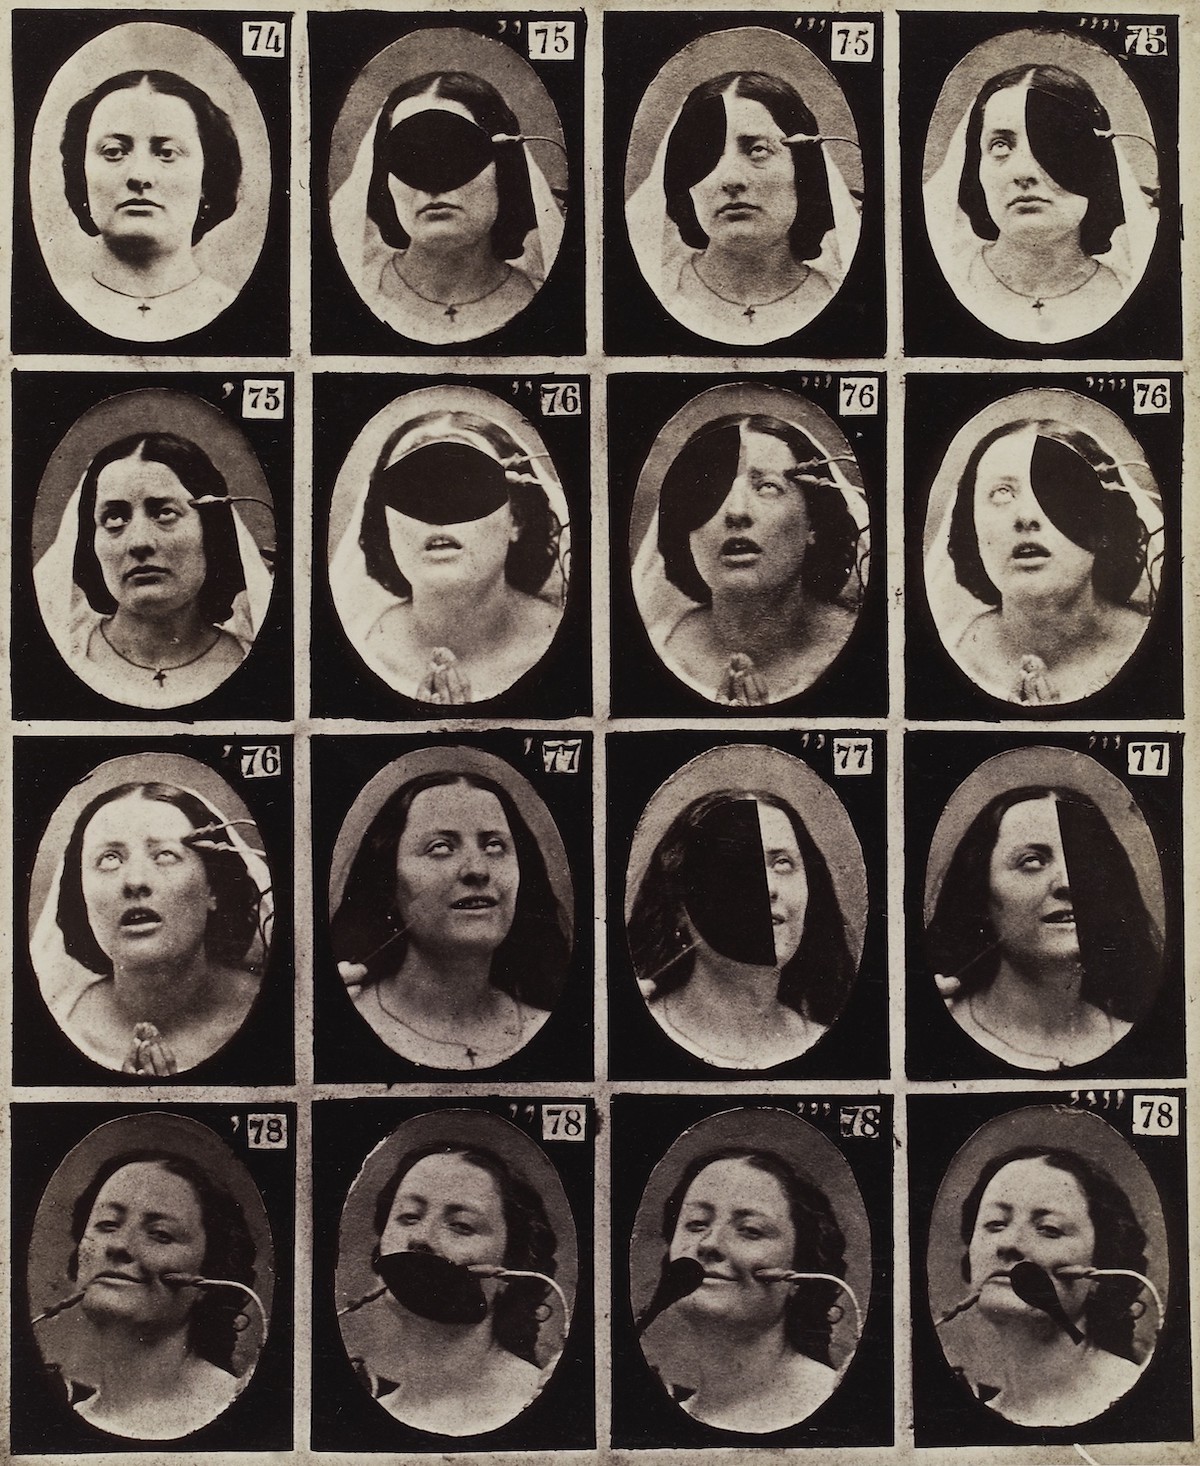 Experiments-in-facial-expressions-by-Guillaume-Benjamin-Amand-Duchenne-de-Boulogne-50.jpg